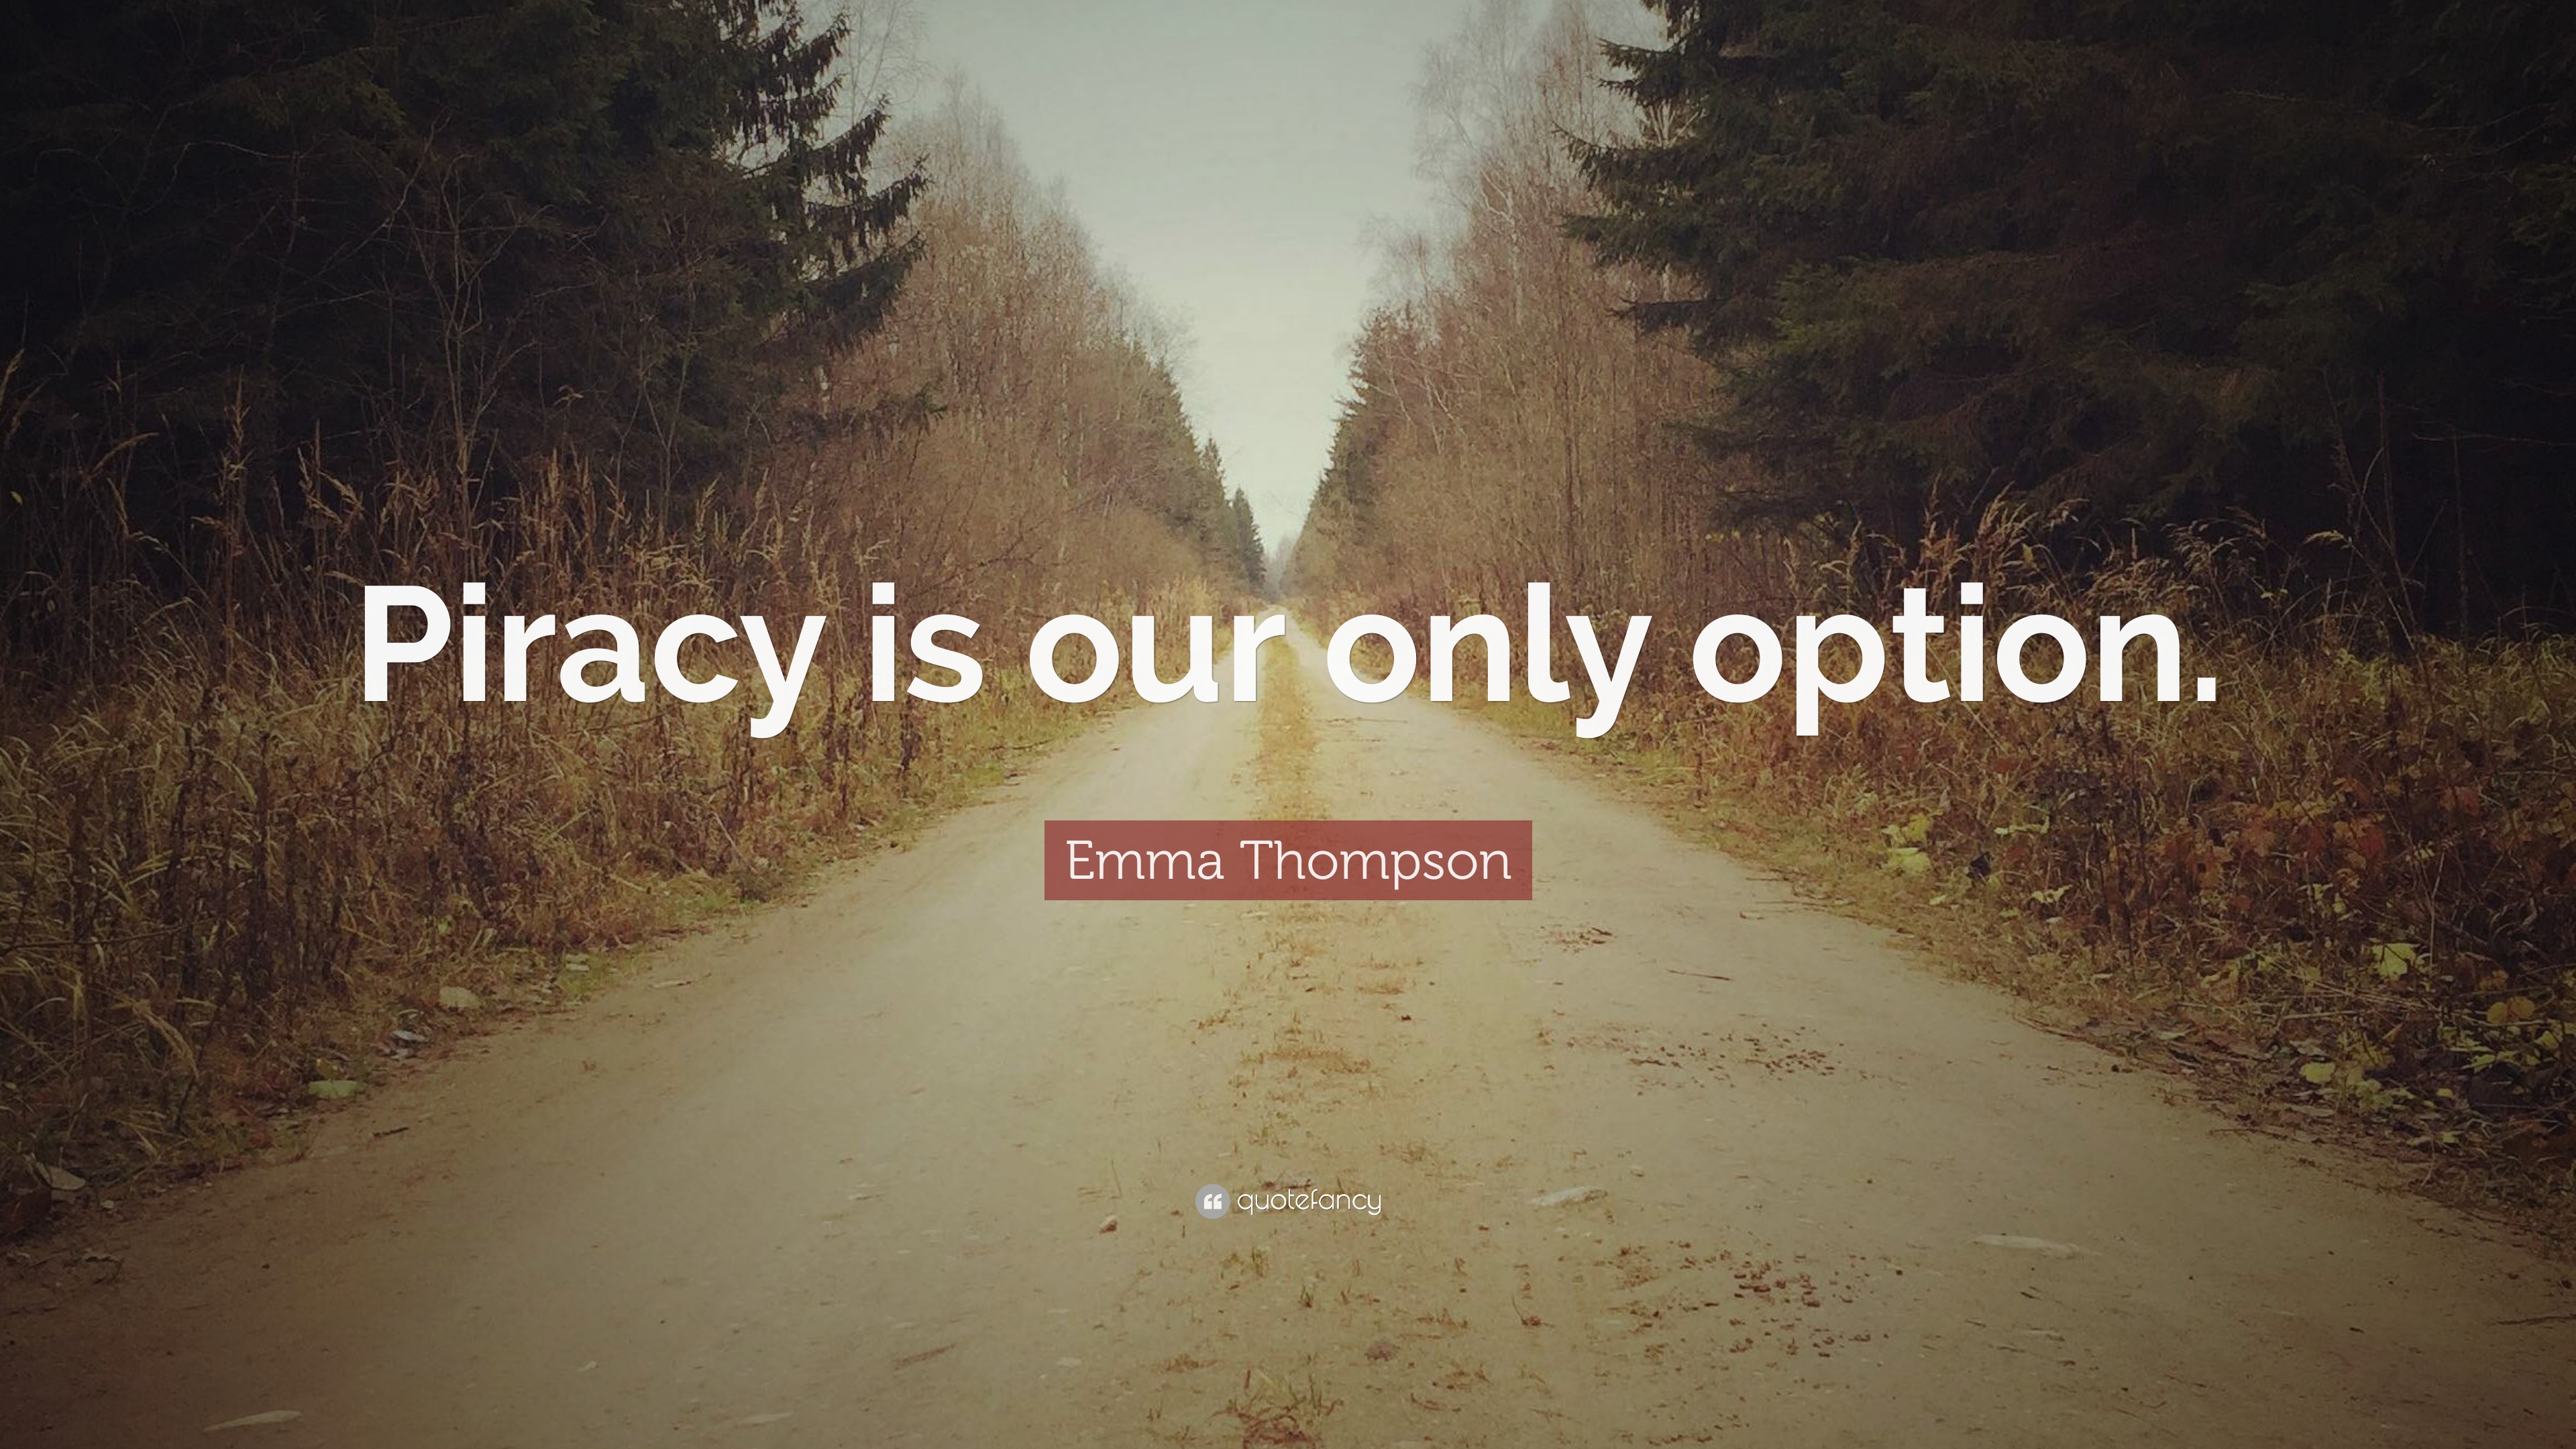 Emma Thompson Quote: “Piracy is our only option.”